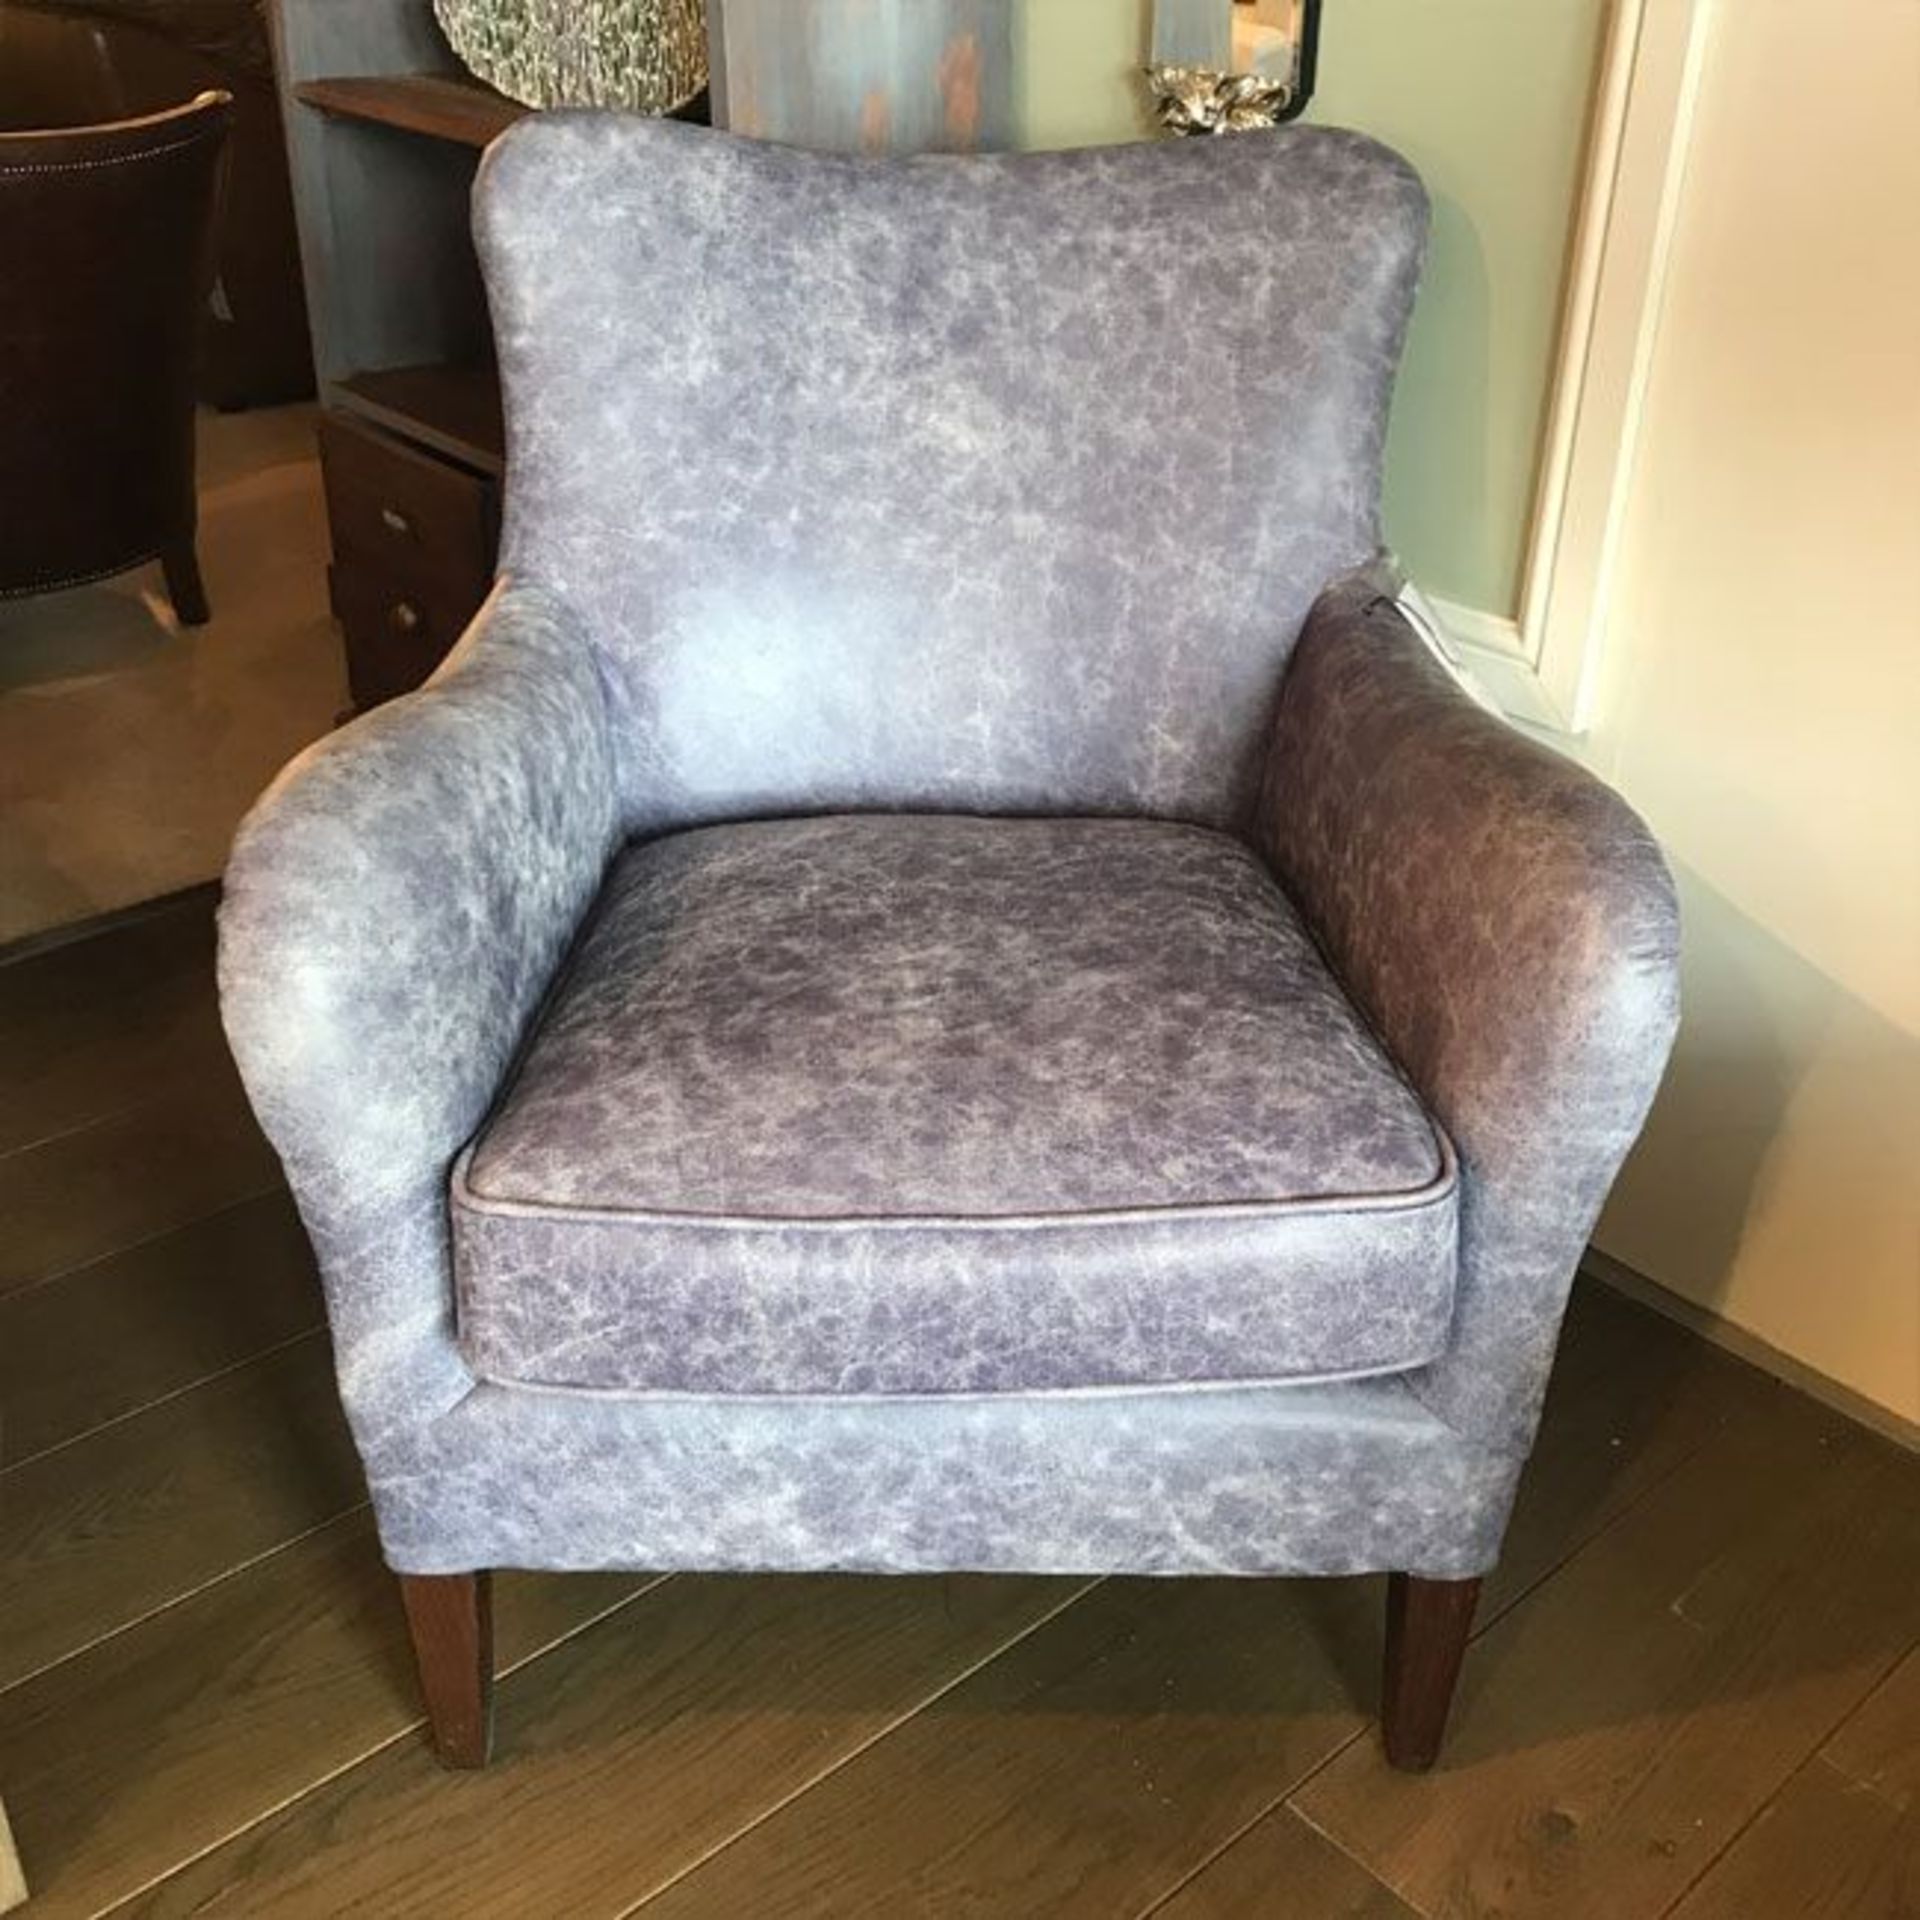 Turnberry Chair Galata Blue Linen Turnberry chair is a snazzy modern take on the vintage club chair.